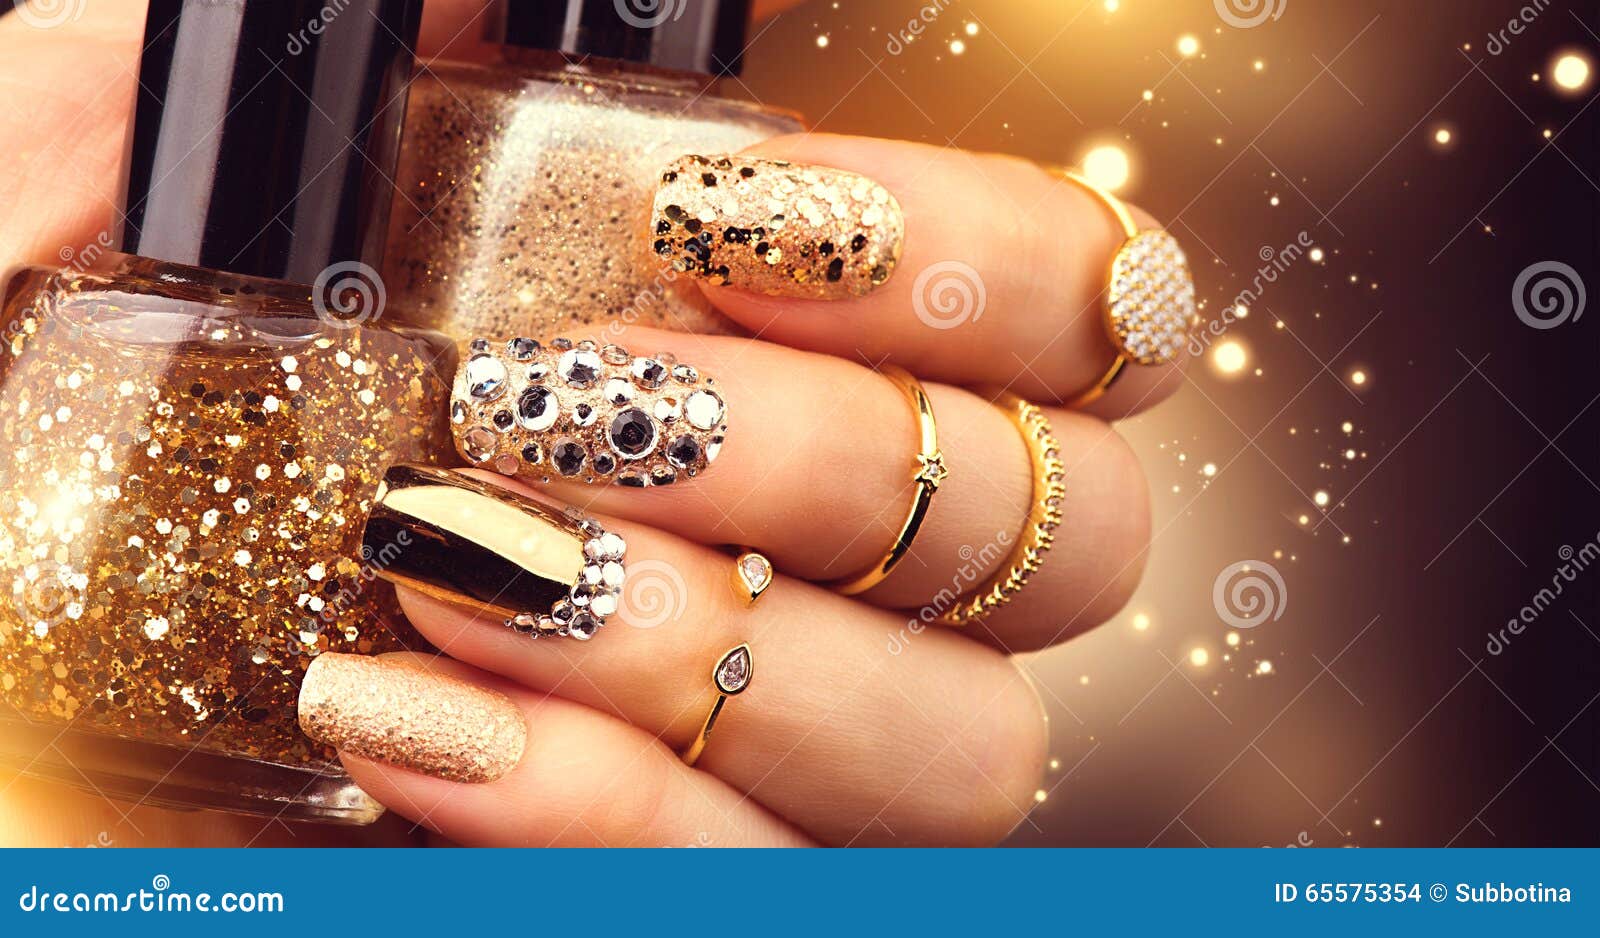 The 30 hottest Christmas and holiday nails to try in 2023 | Fashion news